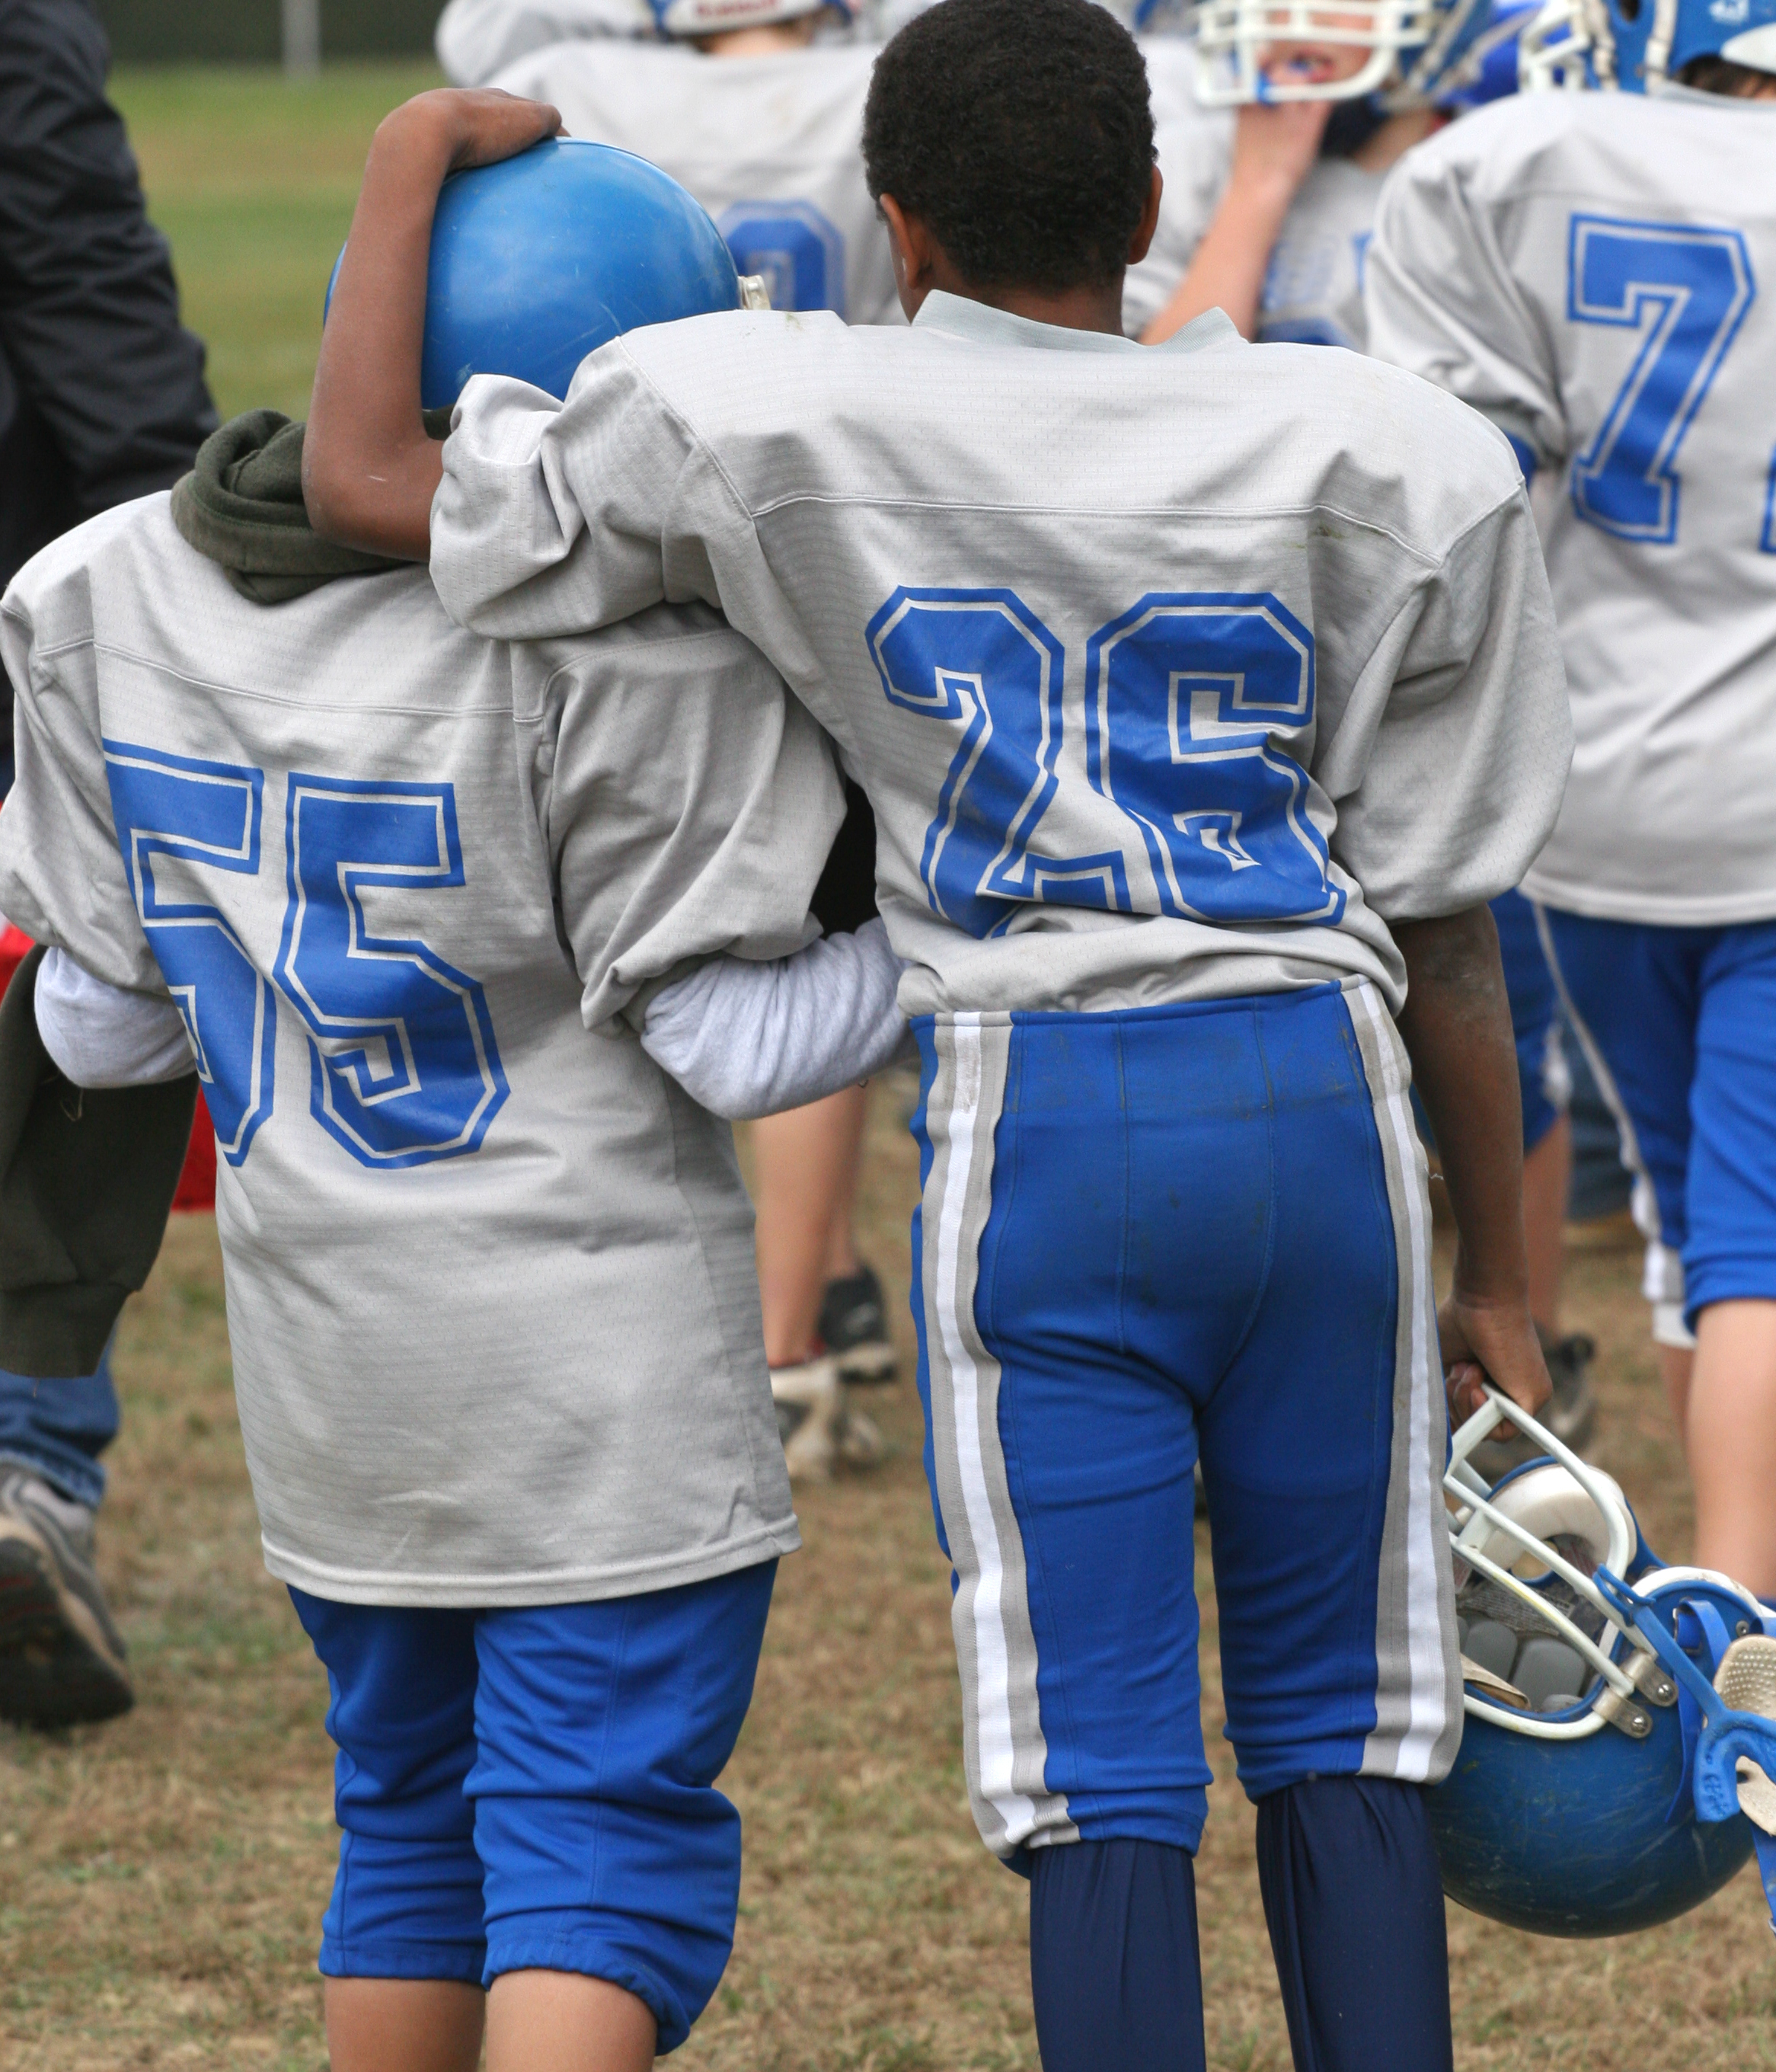 What Are the Health Benefits of Youth Team Sports? - Scripps Health